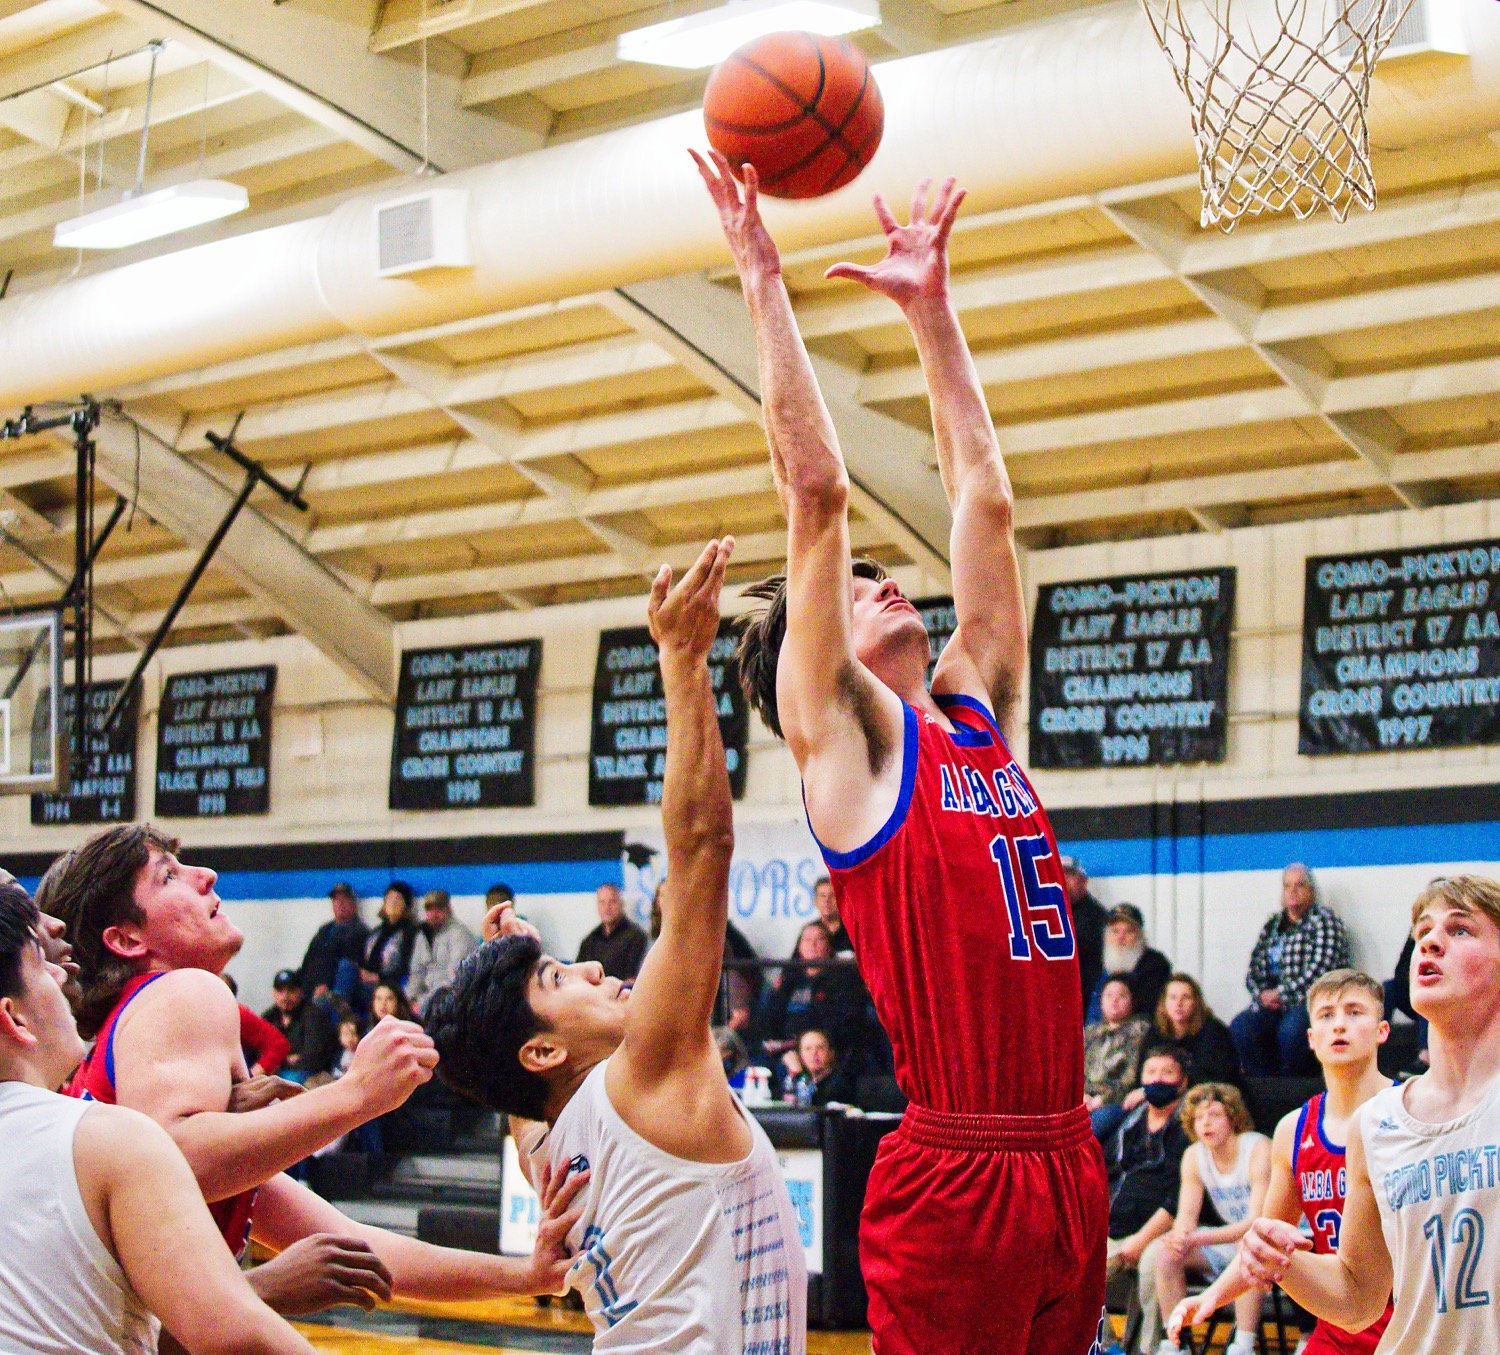 Jack Patton reaches up for the rebound.